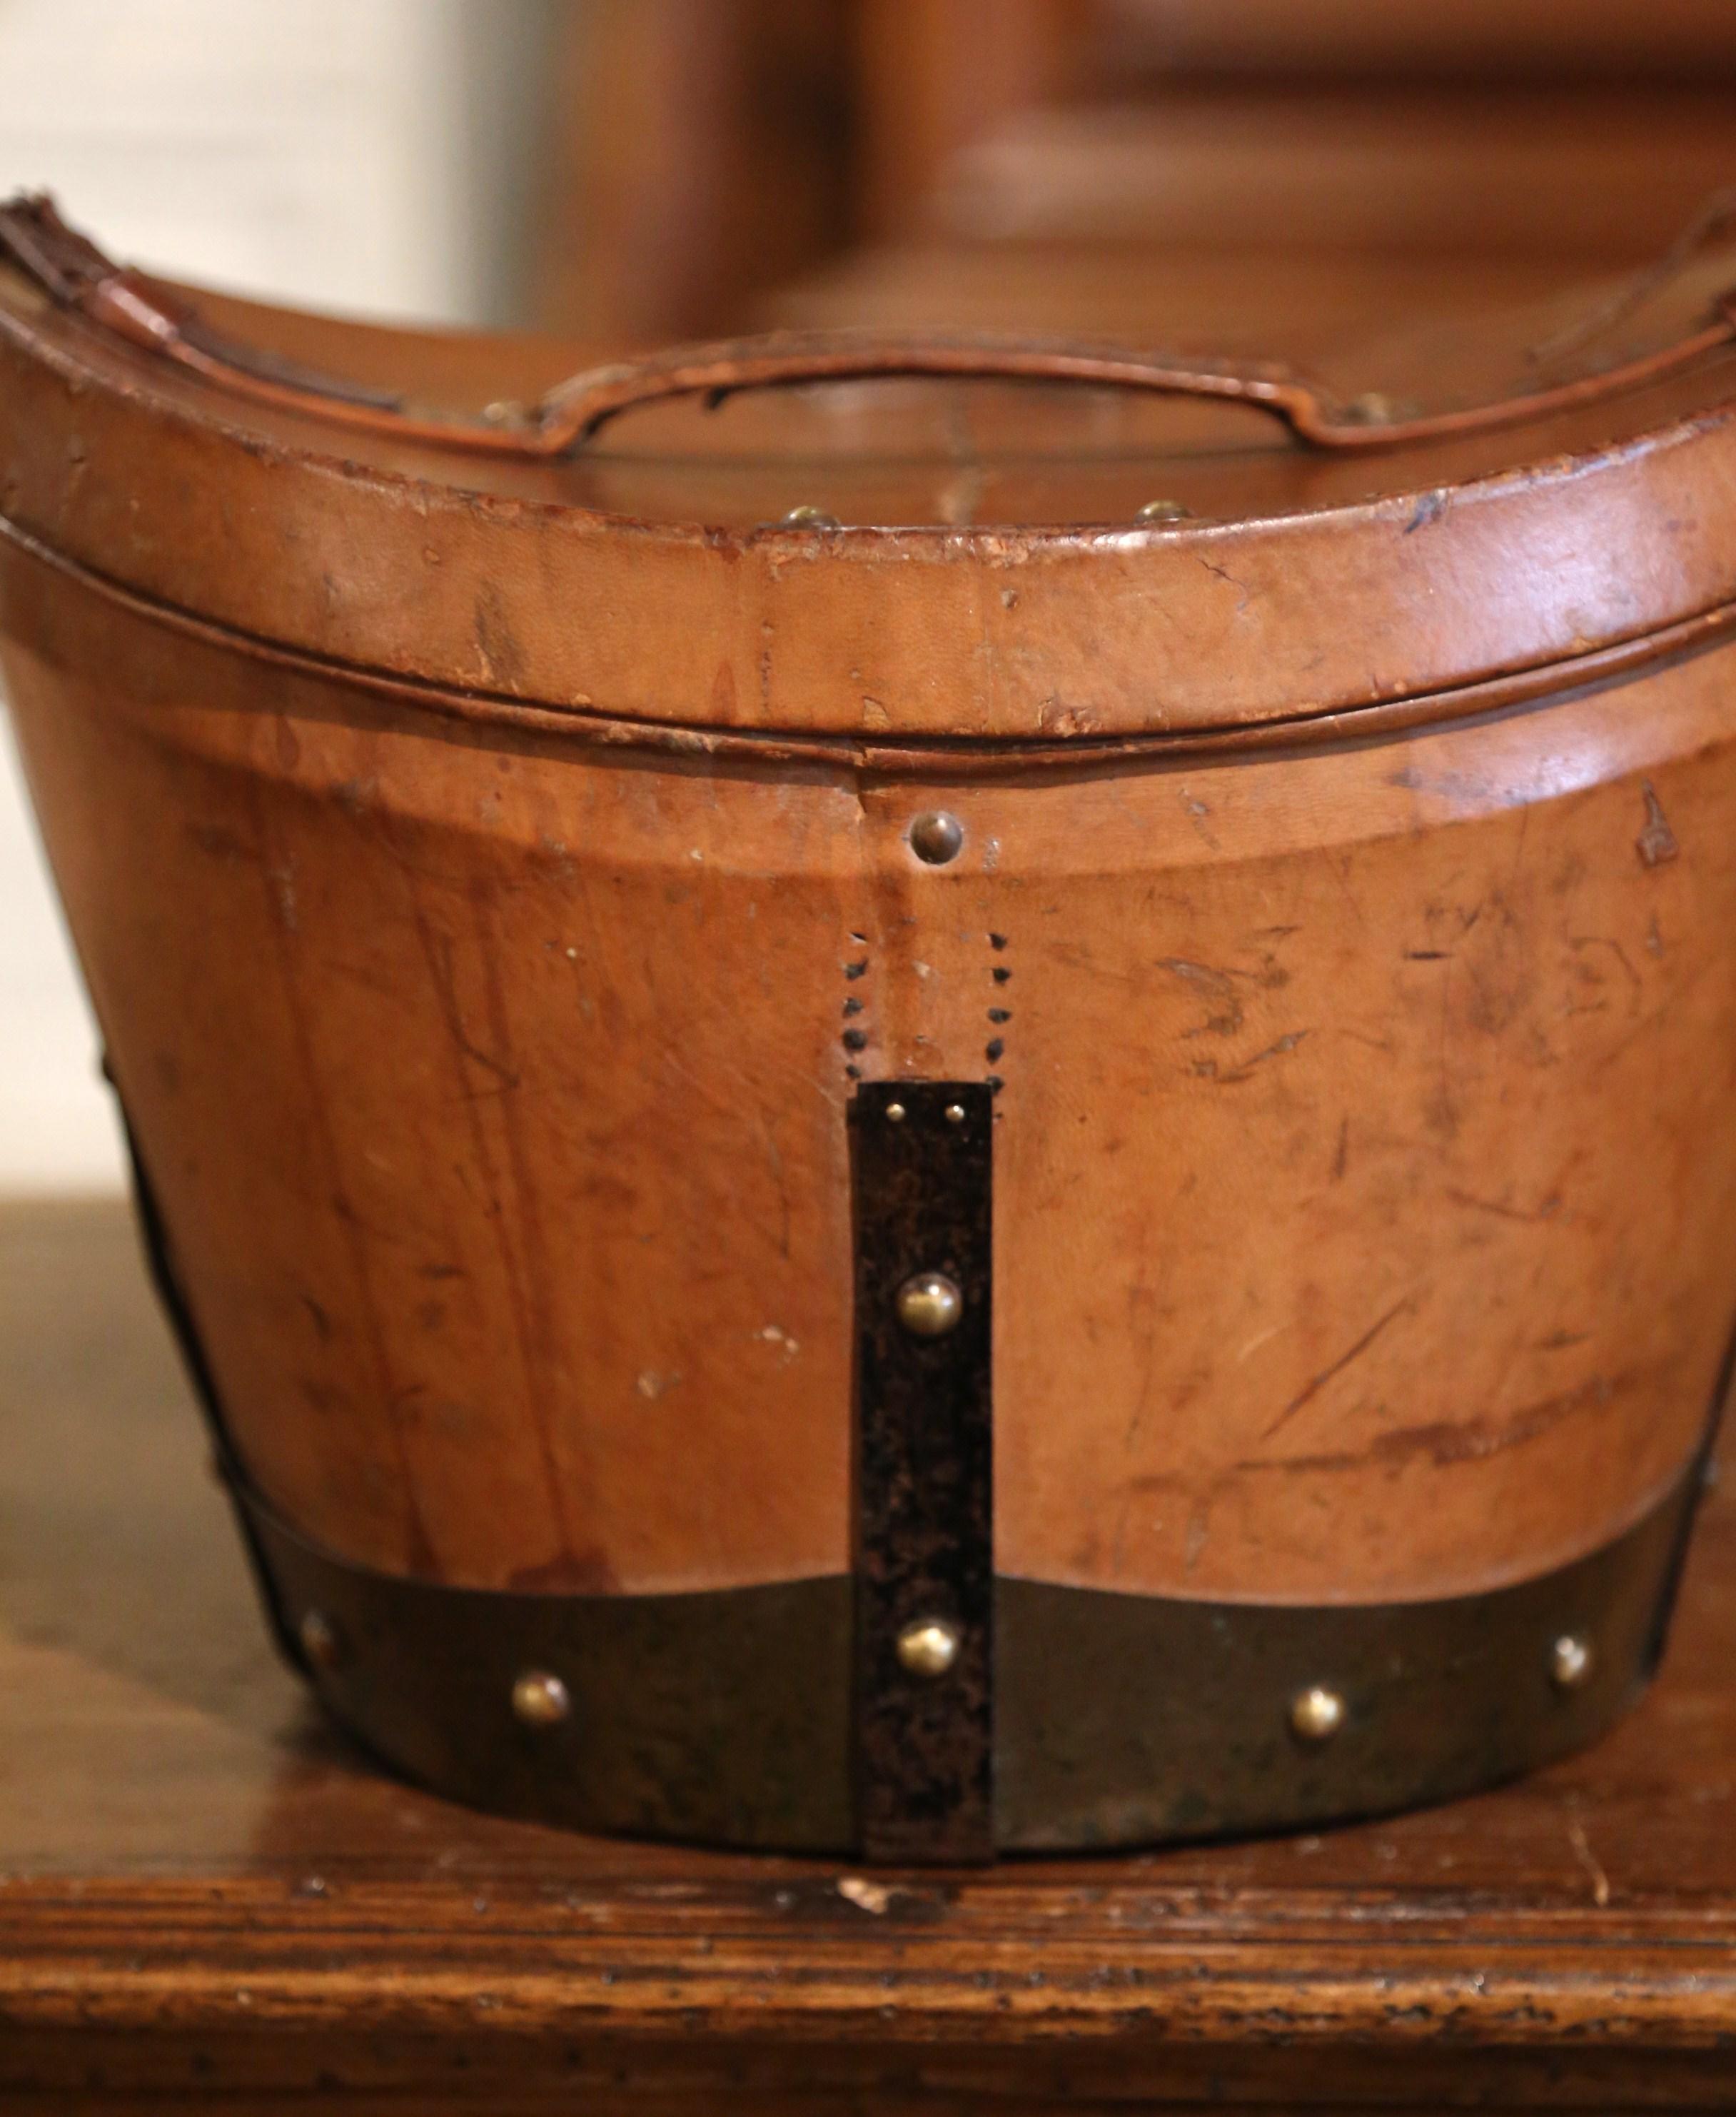 This exquisite, antique pigskin box was crafted in Rouen France, circa 1870. This leather box features leather straps and handle embellished with decorative brass nail heads, and the inside is dressed with the original red upholstery; the piece also